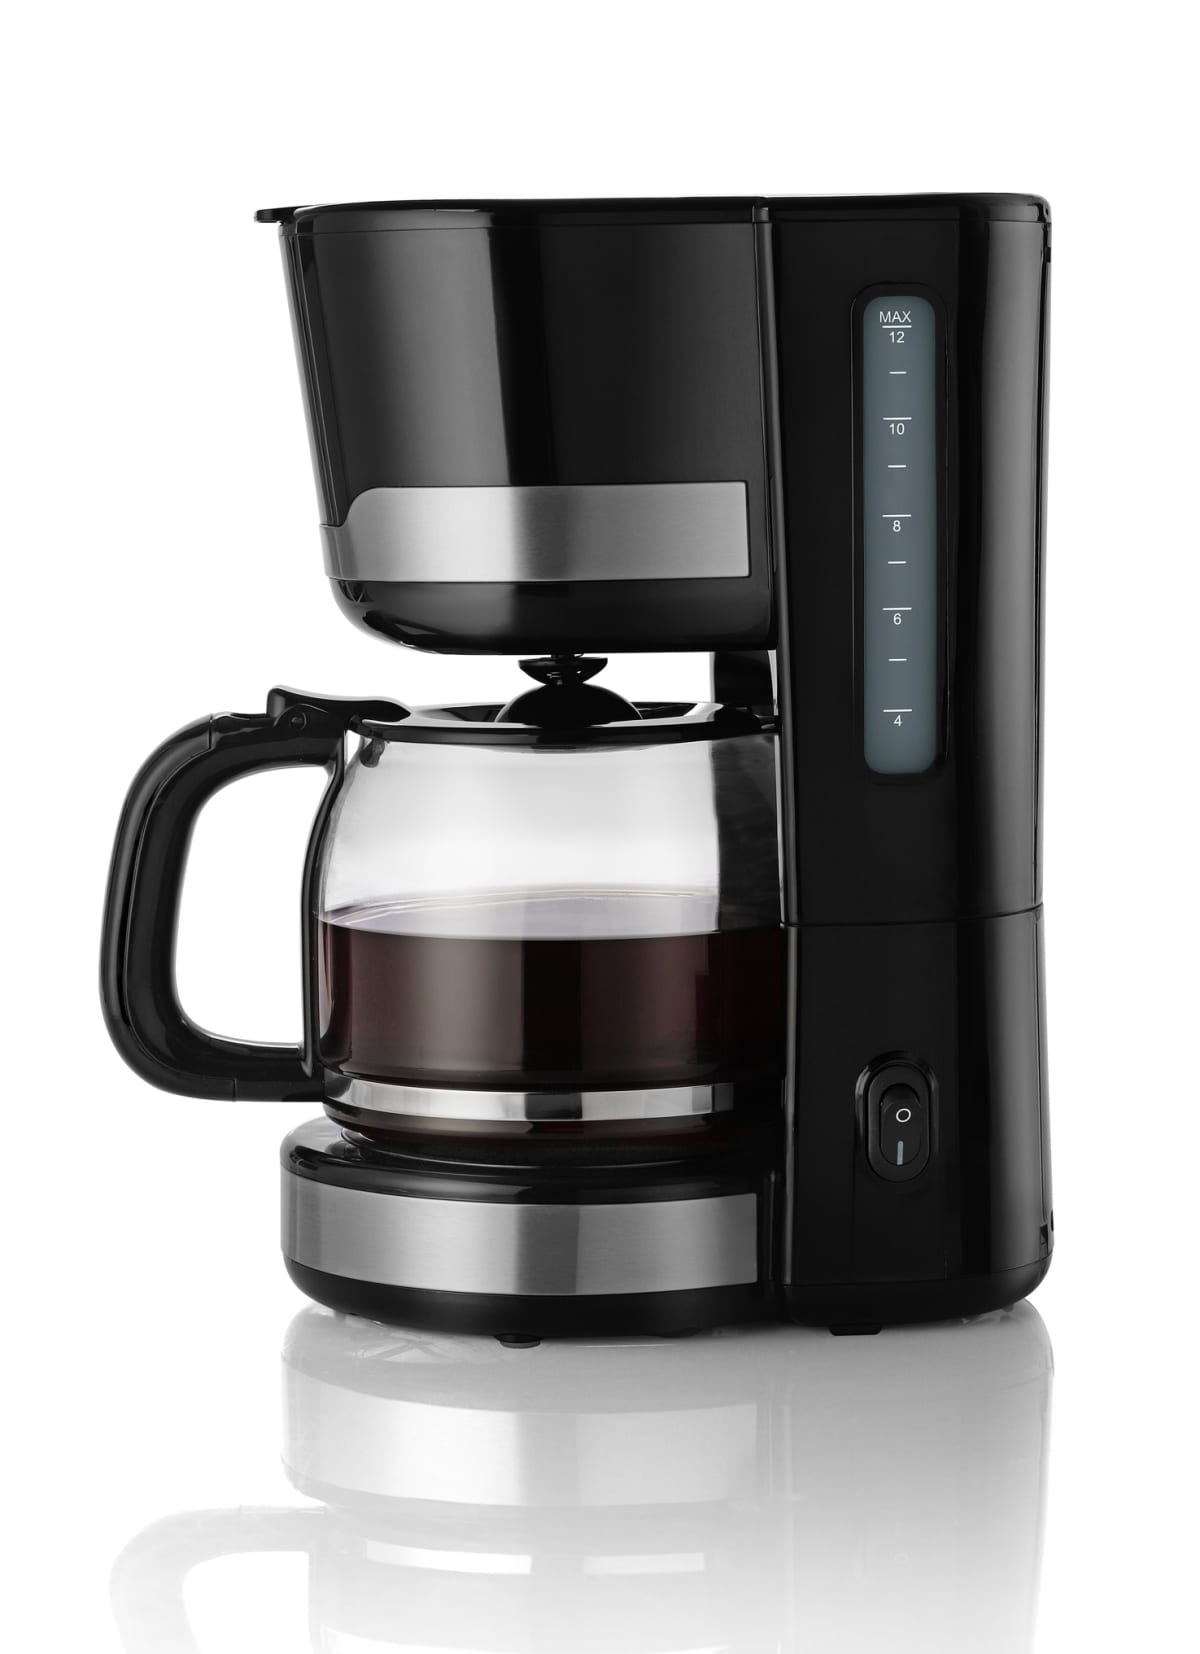 Coffee maker on a white background